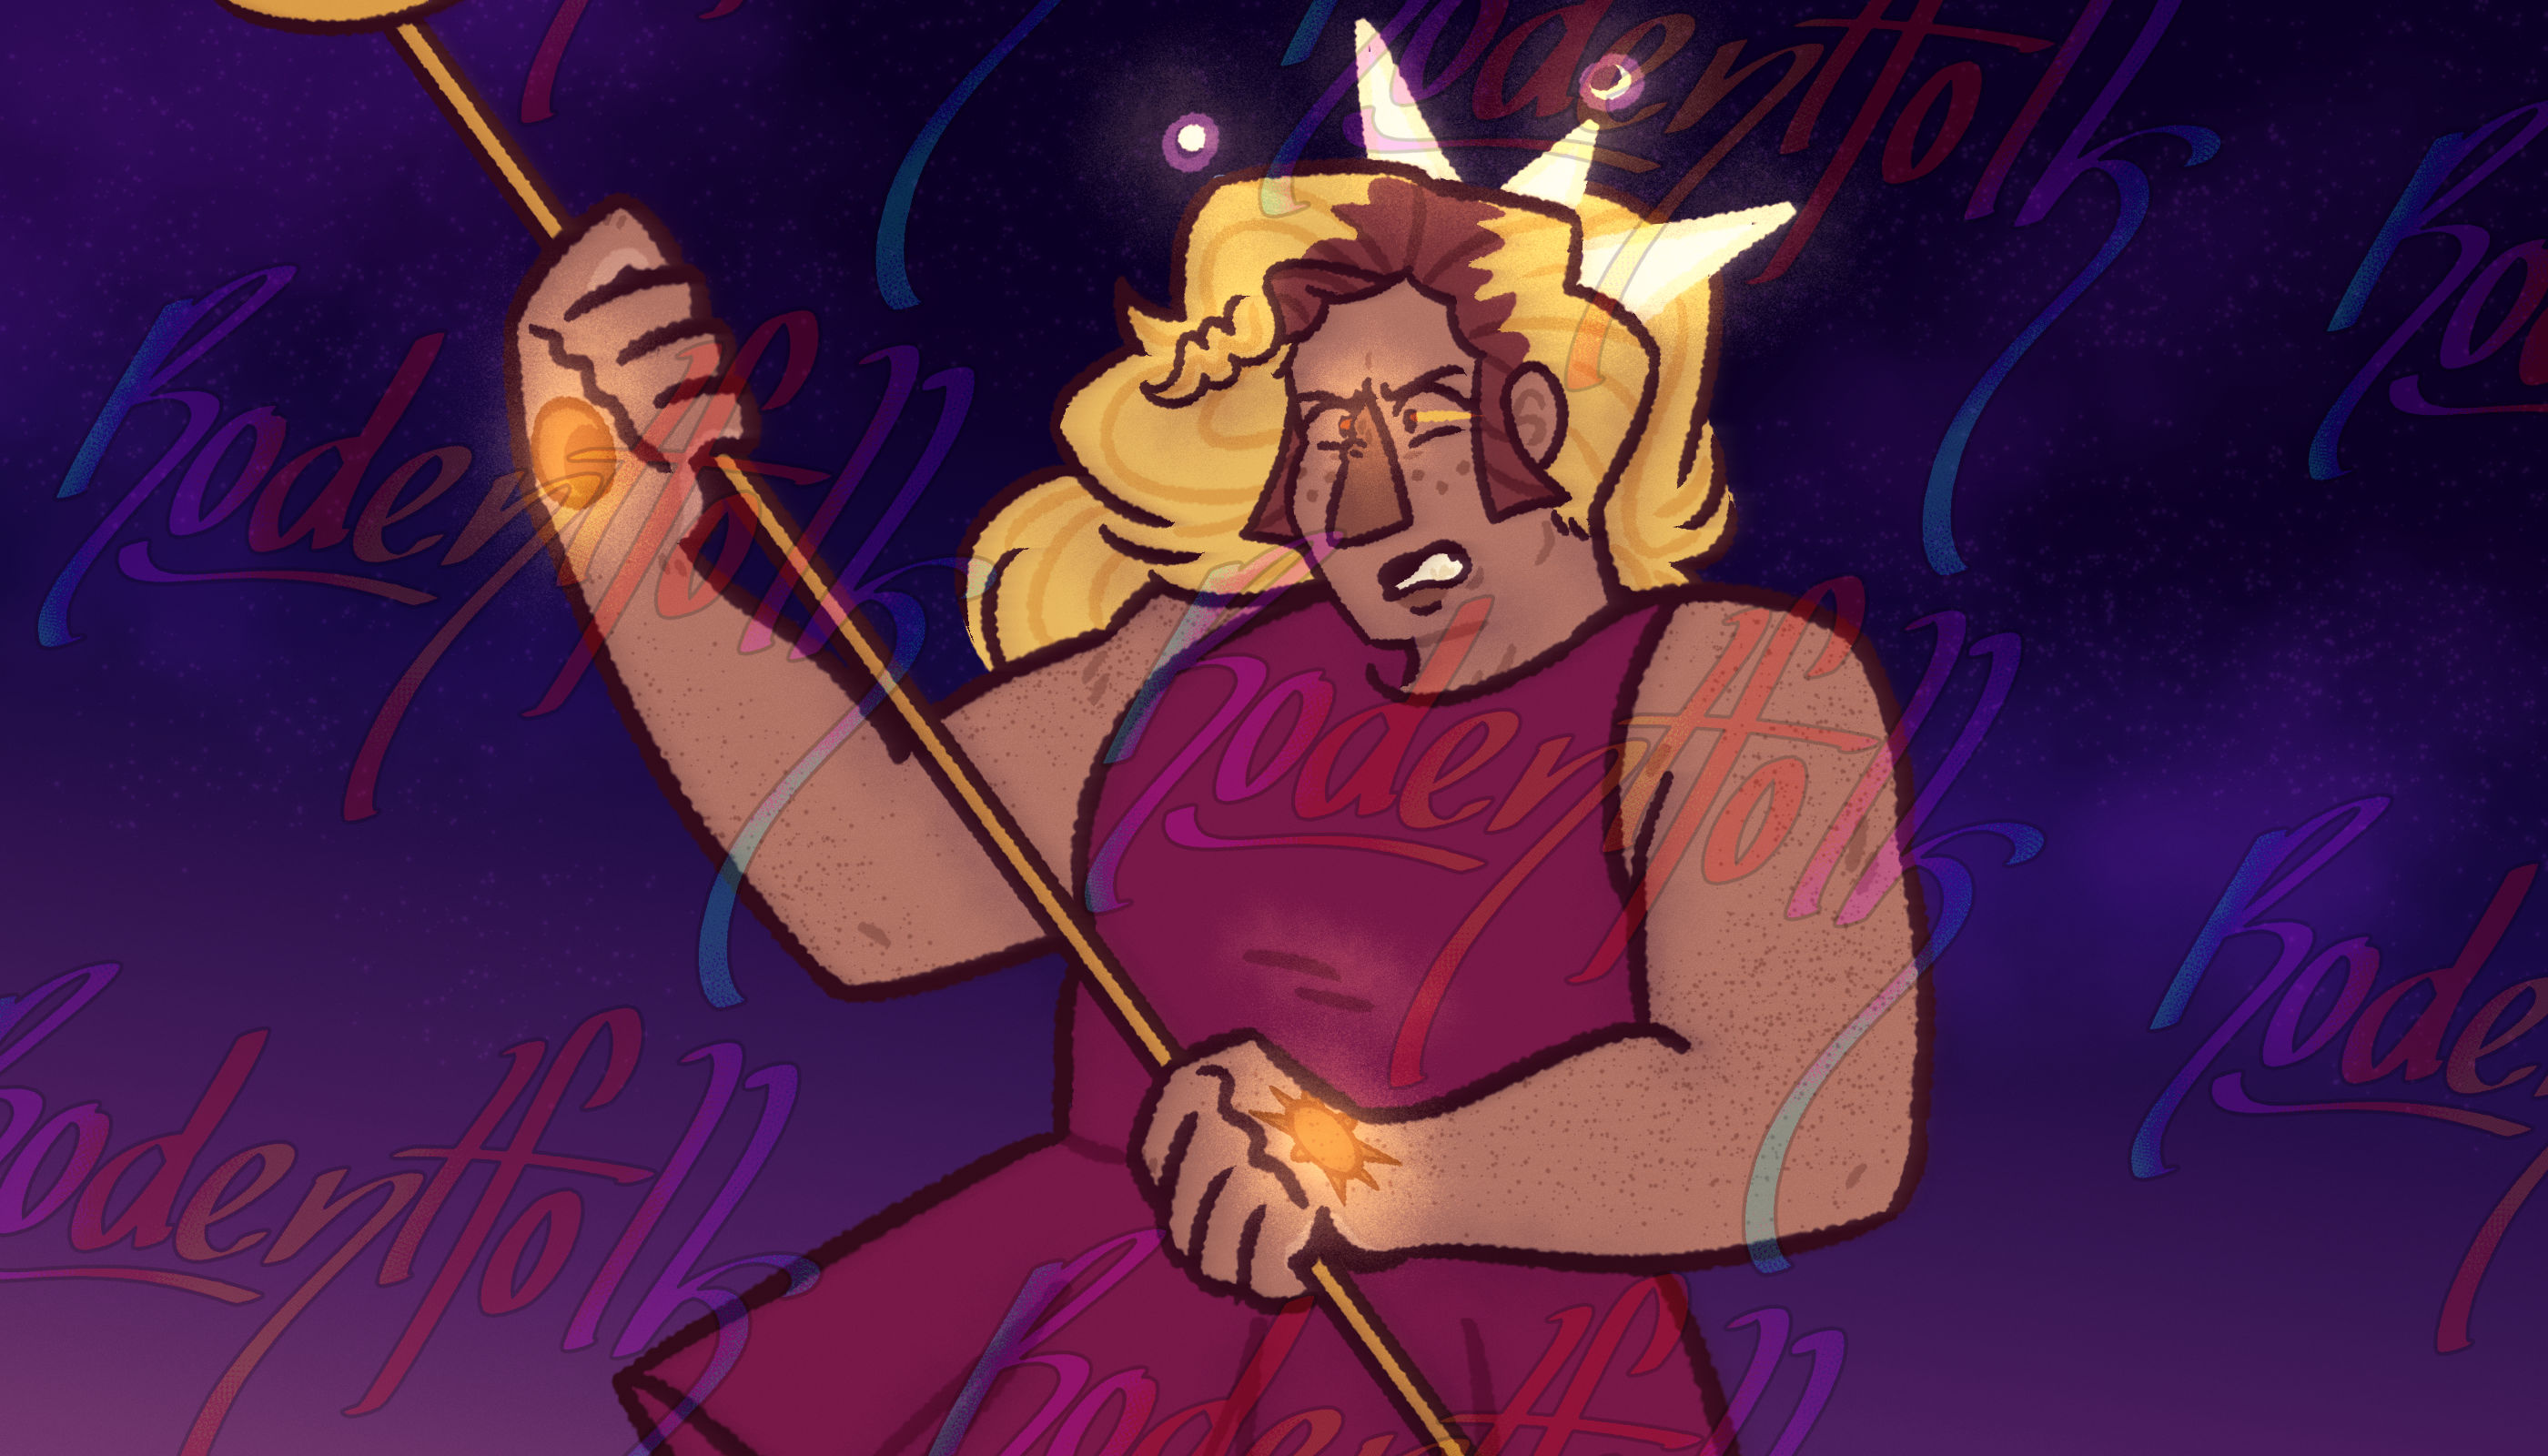 It is a drawing of Nik's OC, River. He is wearing a sleeveless dark magenta tunic/dress with a glowing white sun crown with moons floating around it. He is holding a golden staff with the top just out of shot, in a position to dodge an attack. He looks furiously at someone out of shot. The sun and moon symbols on his hands glow faintly.